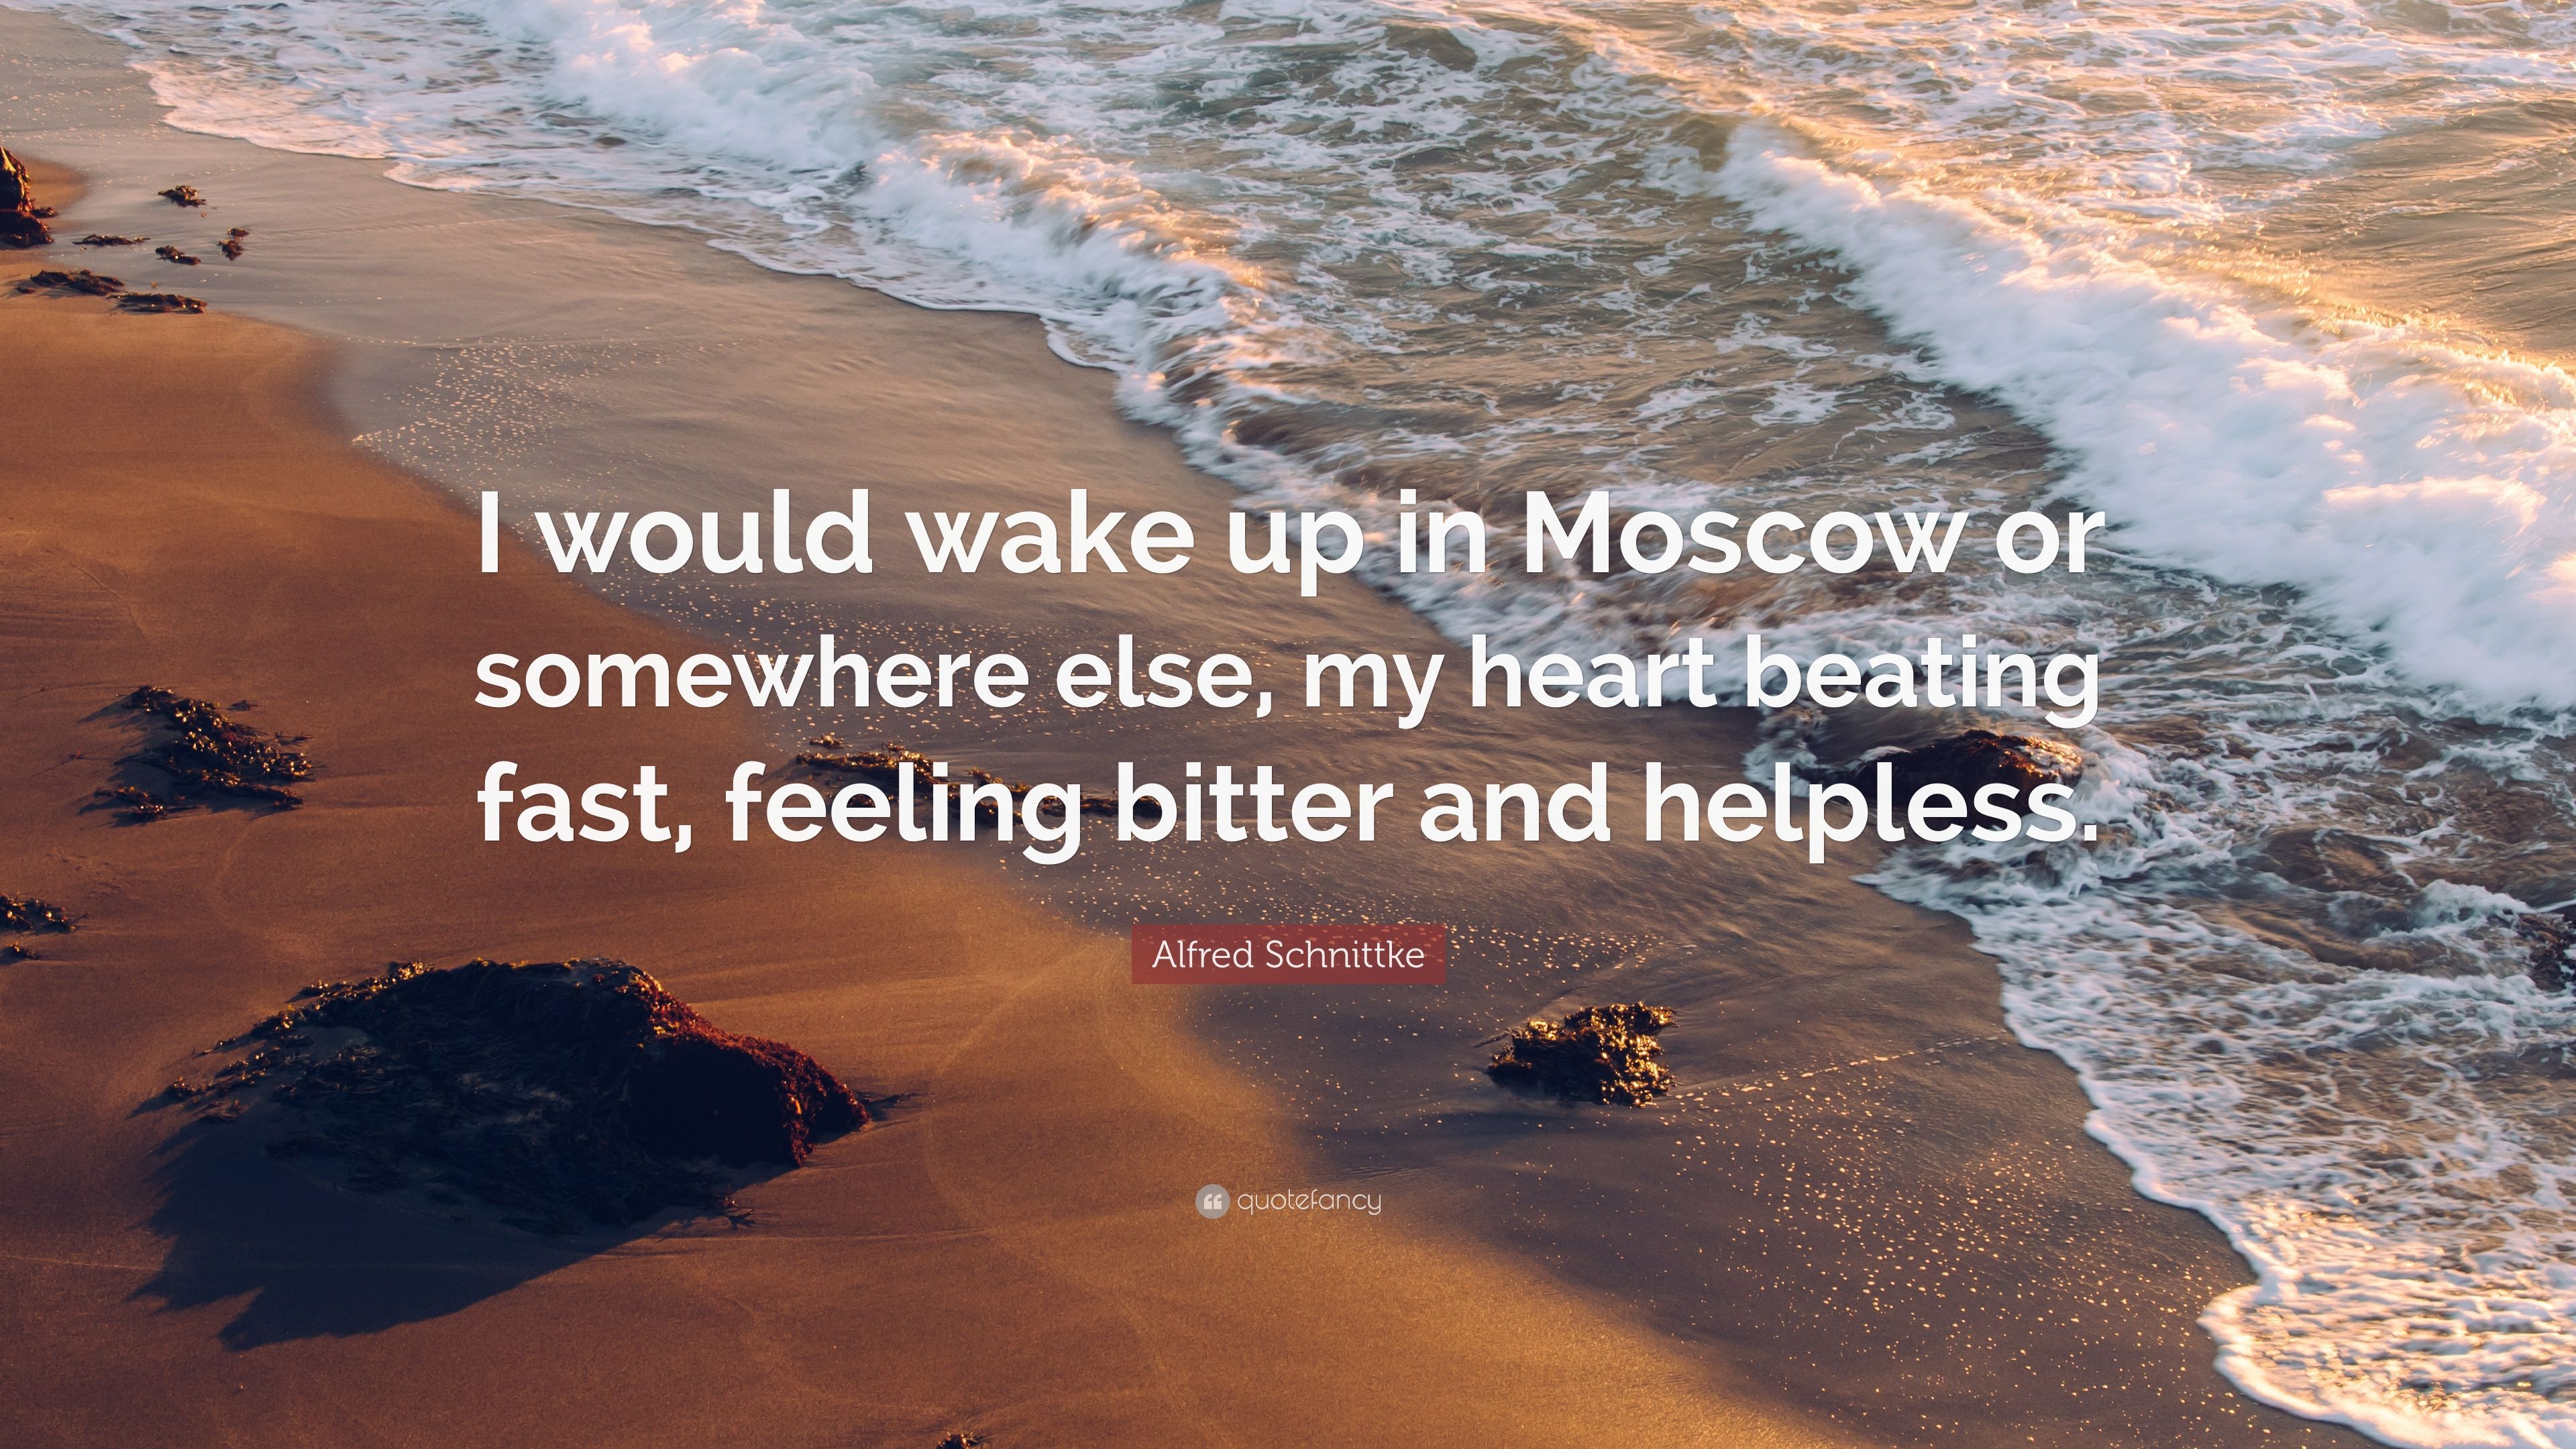 Alfred Schnittke Quote: “I would wake up in Moscow or somewhere